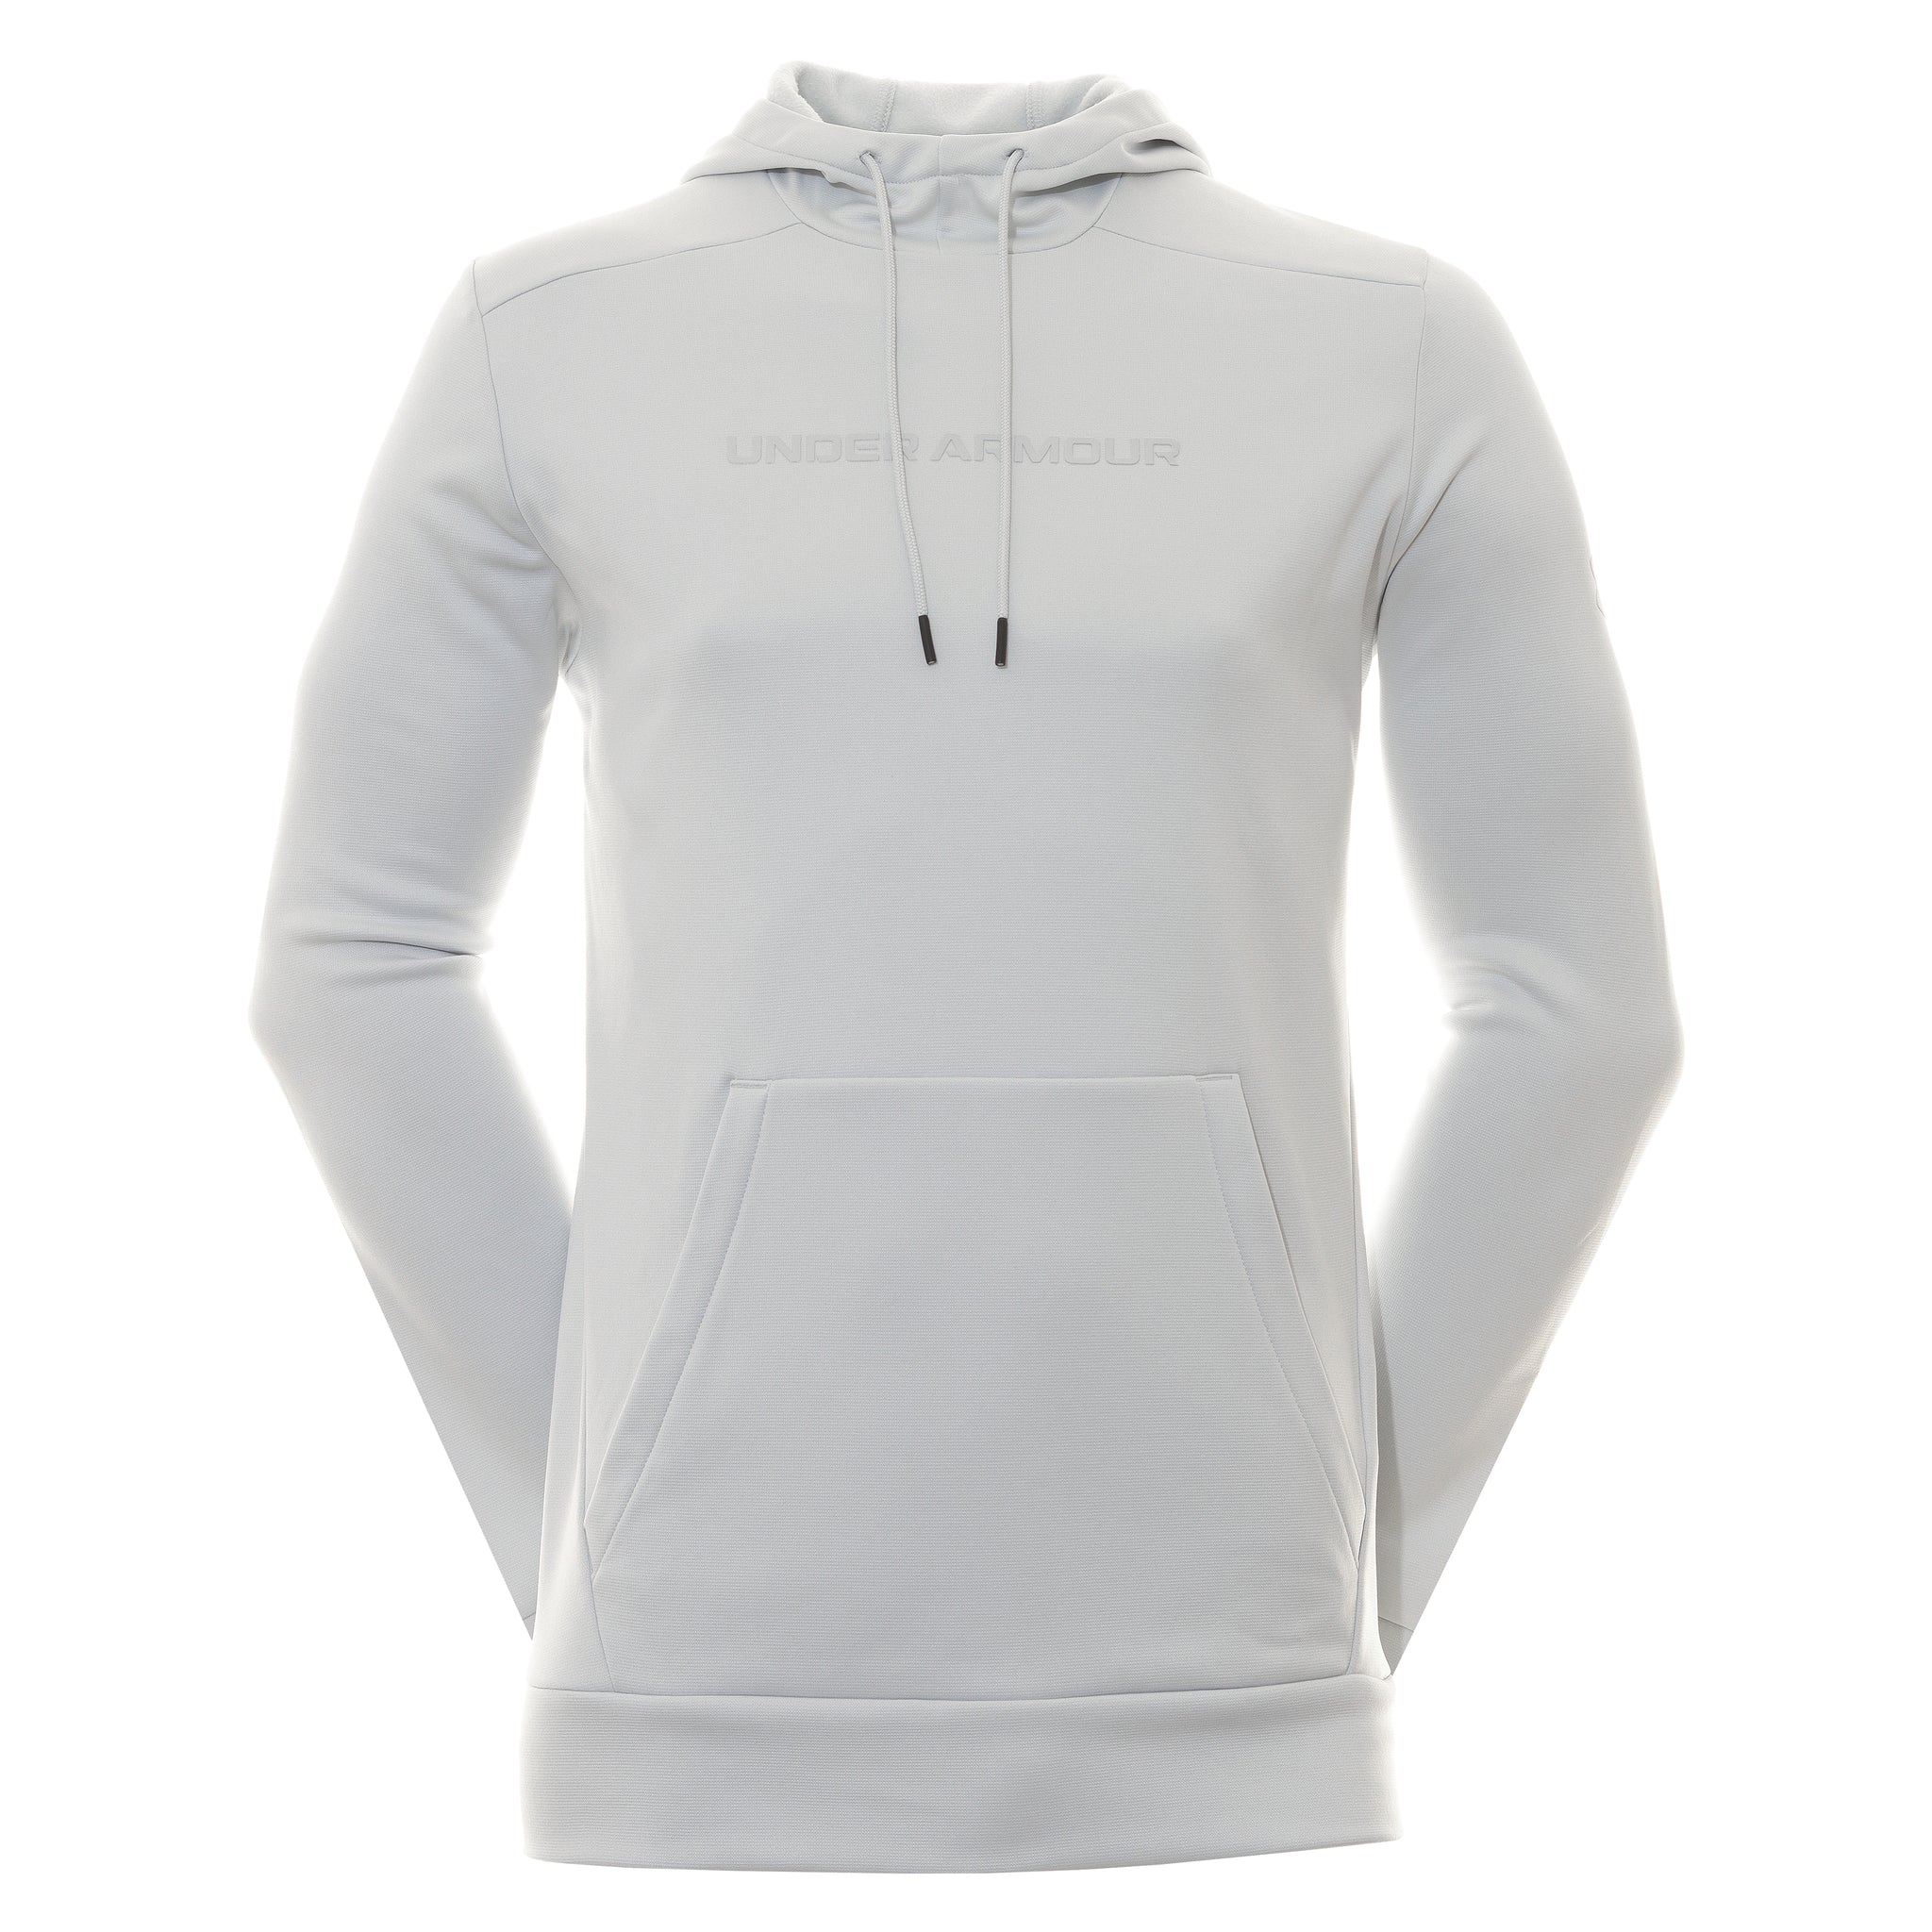 Under Armour Golf Armour Fleece Graphic Hoodie 1379744 Halo Grey 014, Function18